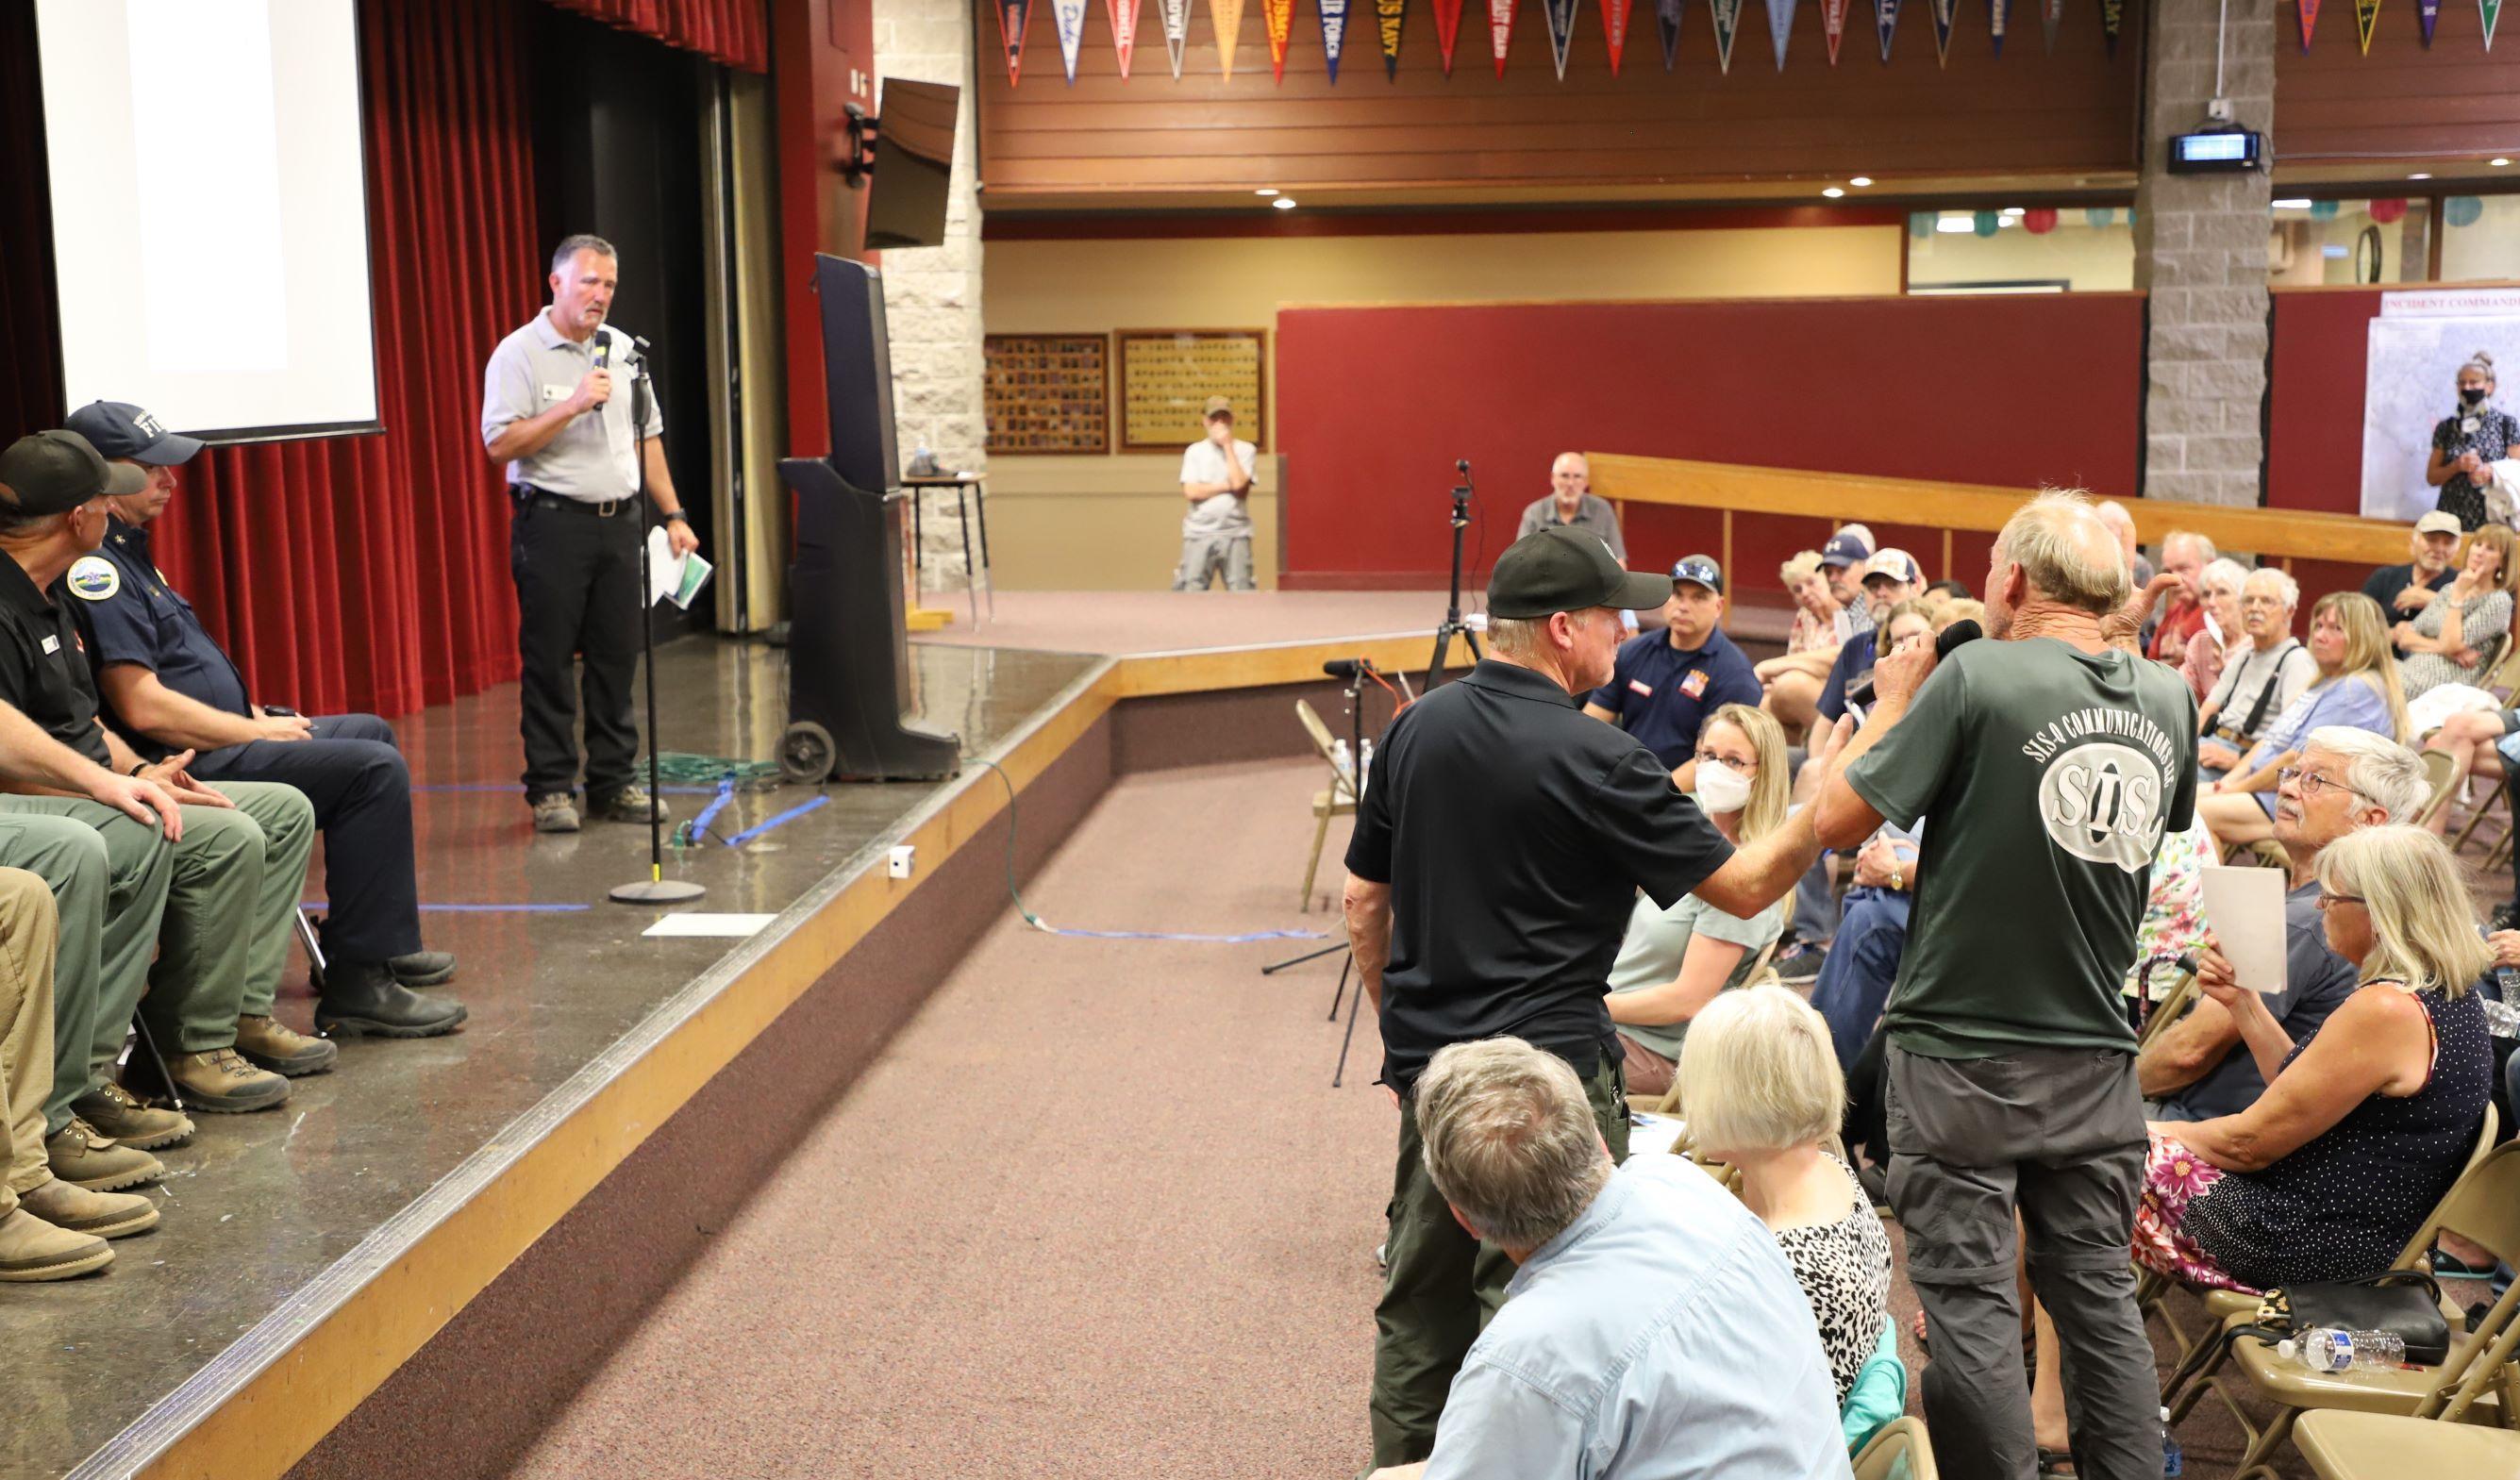 A member of the audience is asking a fire representative a question during the community meeting held August 30 in Grants Pass.